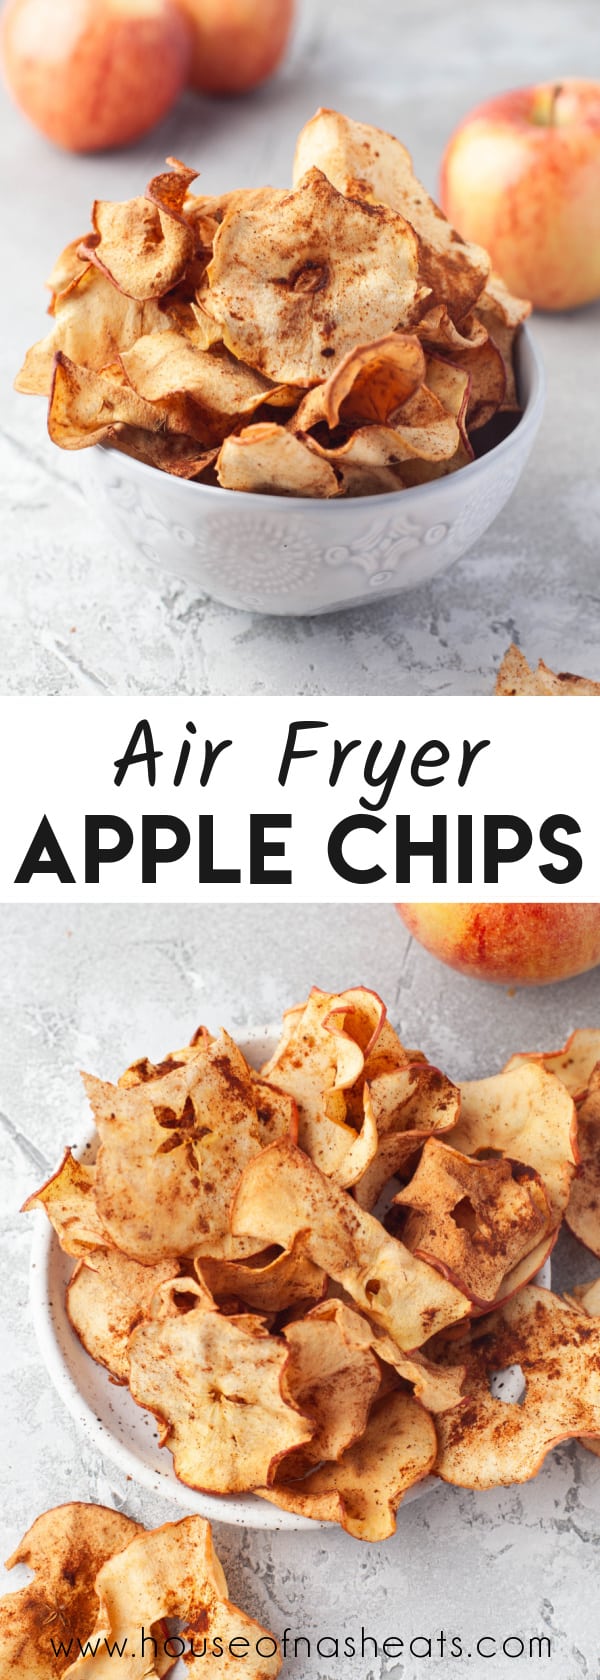 A collage of images of apple chips with text overlay.